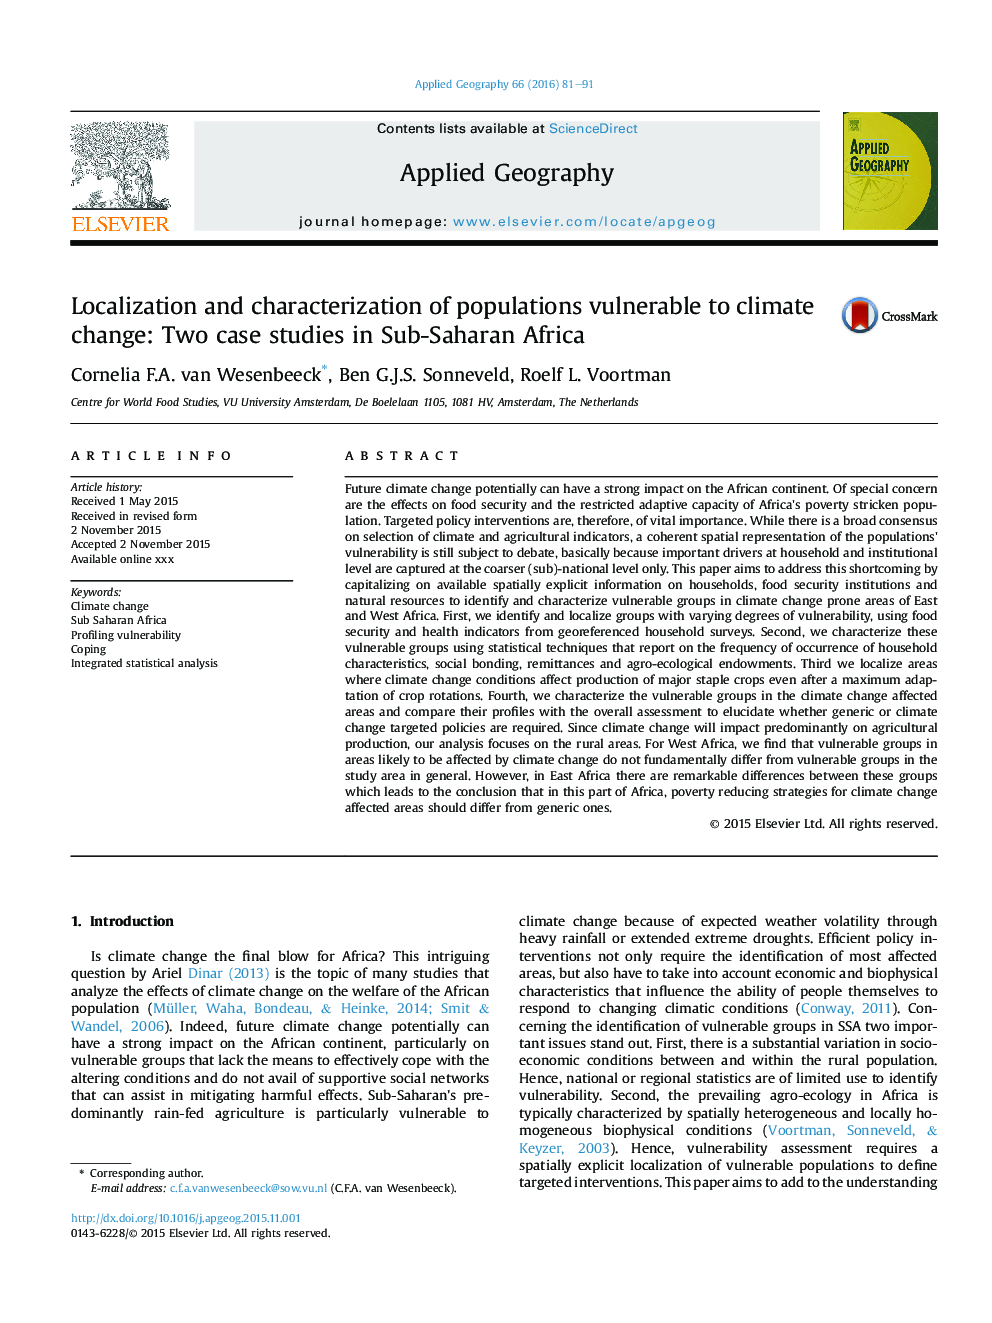 Localization and characterization of populations vulnerable to climate change: Two case studies in Sub-Saharan Africa